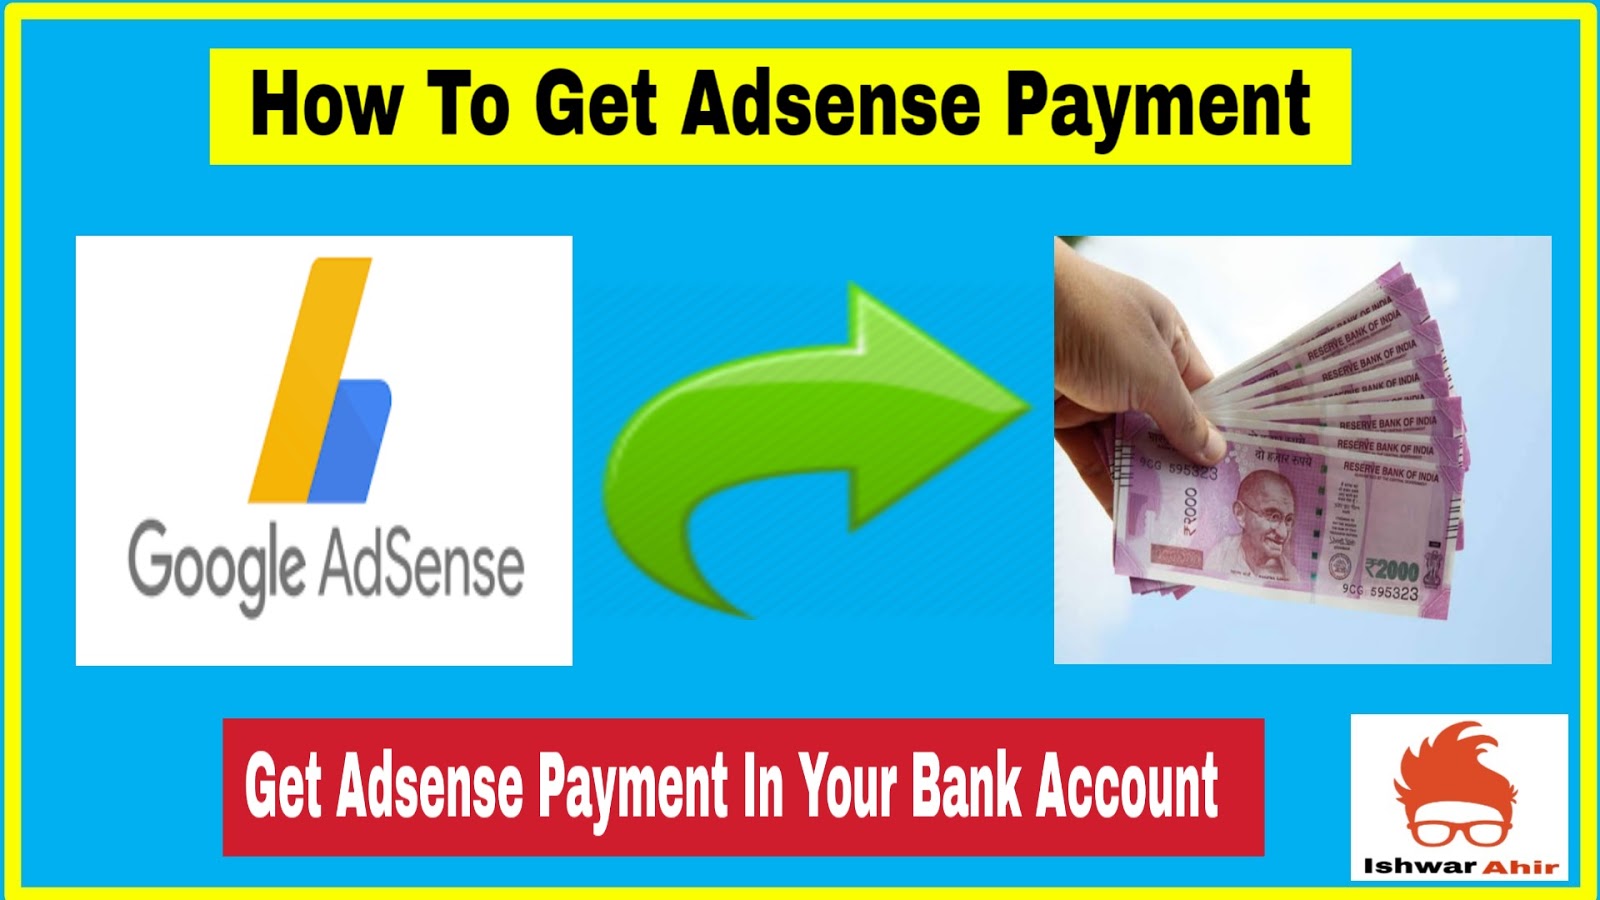 How to Get Adsense Payment